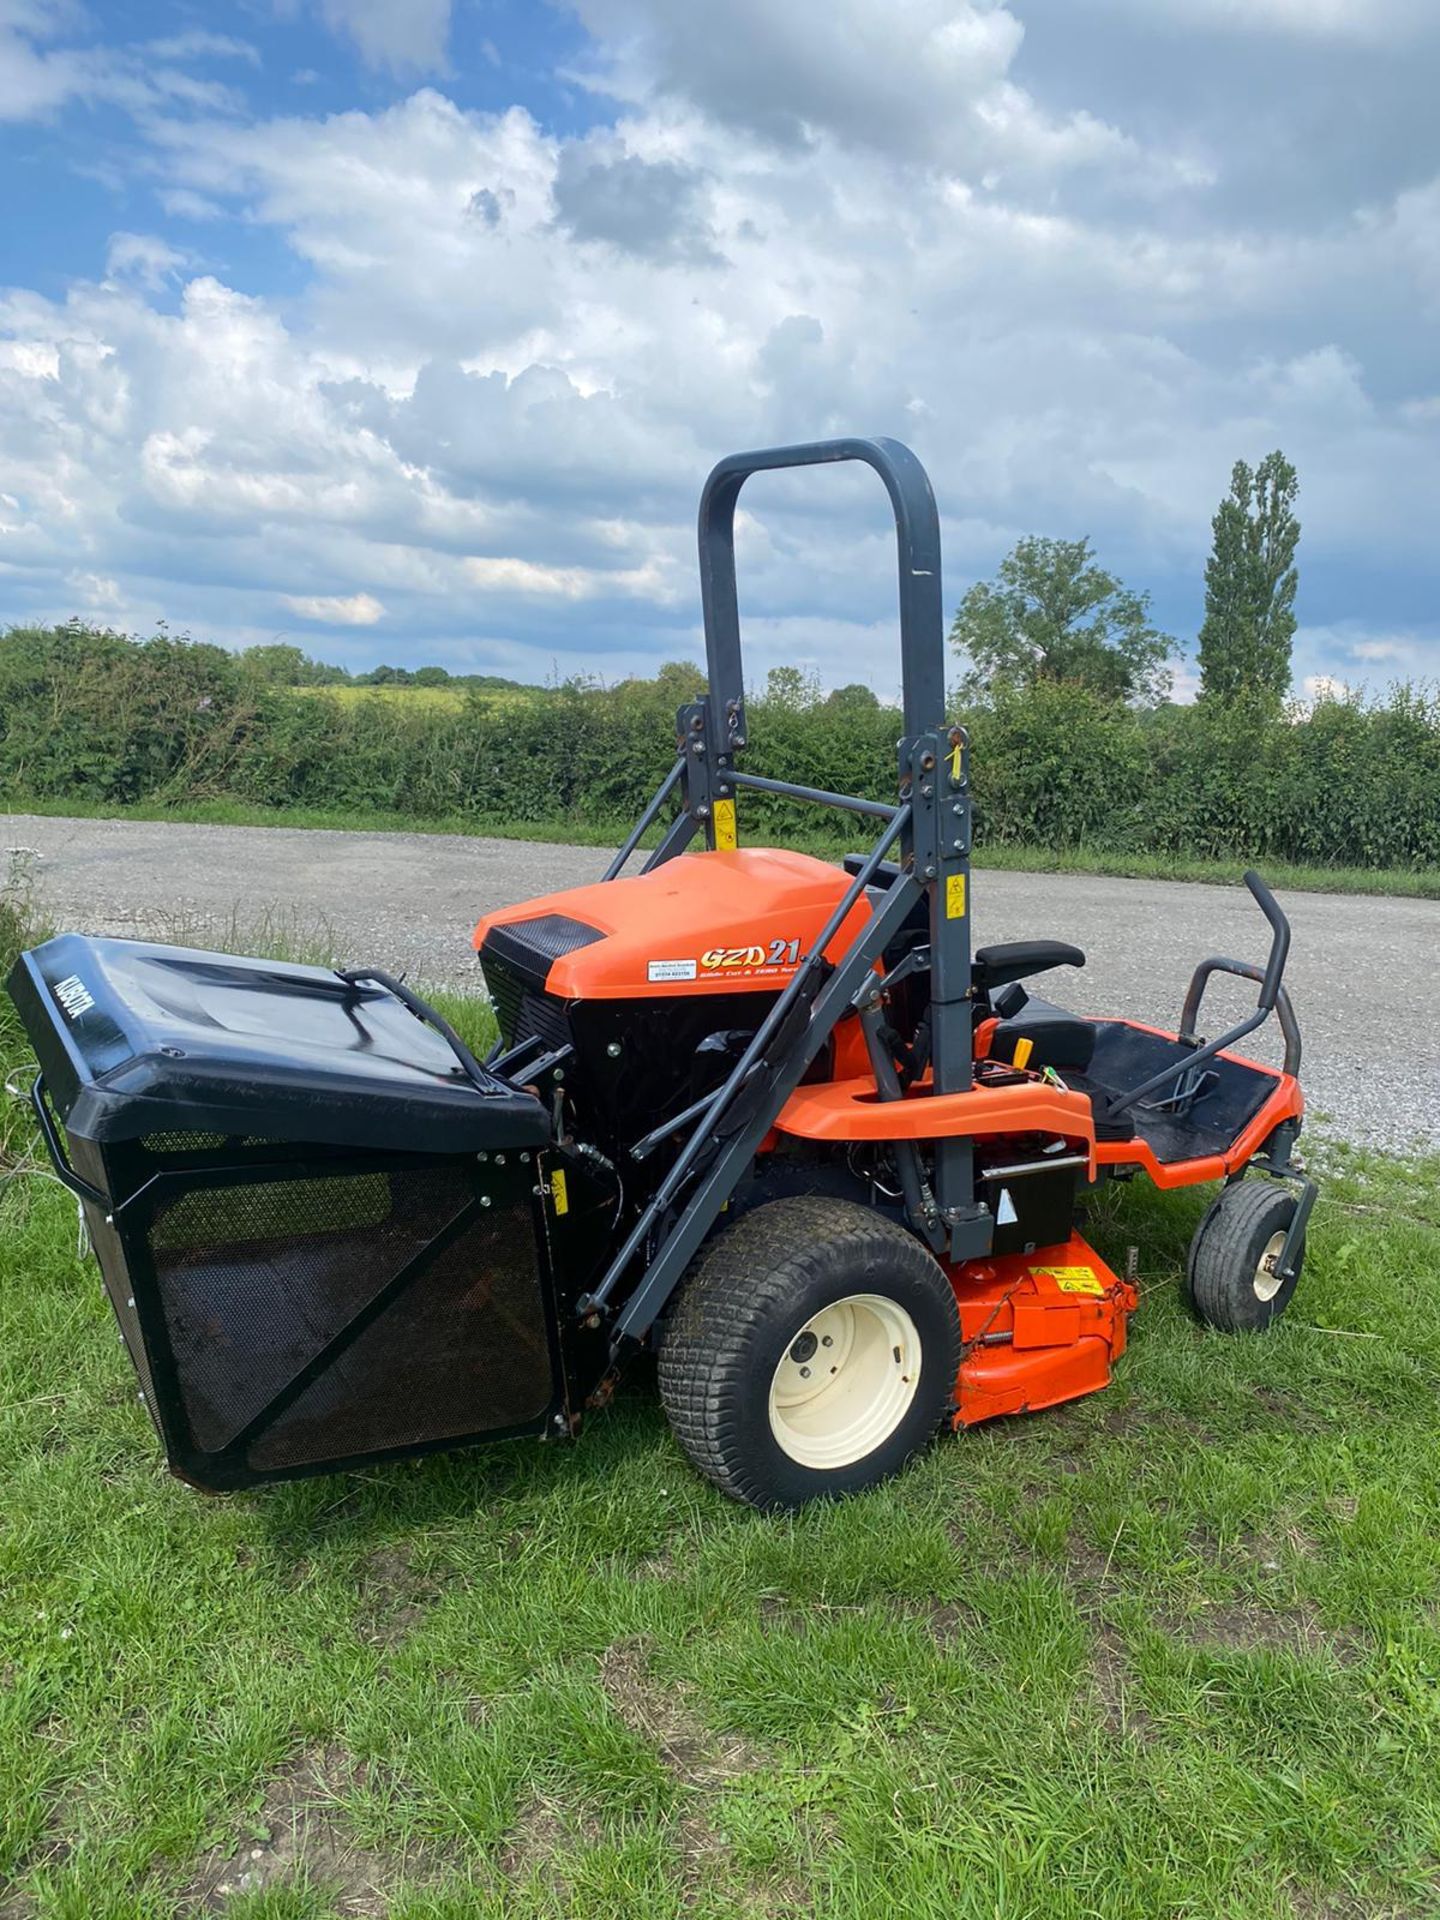 2015 KUBOTA GZD21 HIGH TIP ZERO TURN MOWER, SOLD NEW MID 2017, SHOWING A LOW 203 HOURS *PLUS VAT* - Image 6 of 8